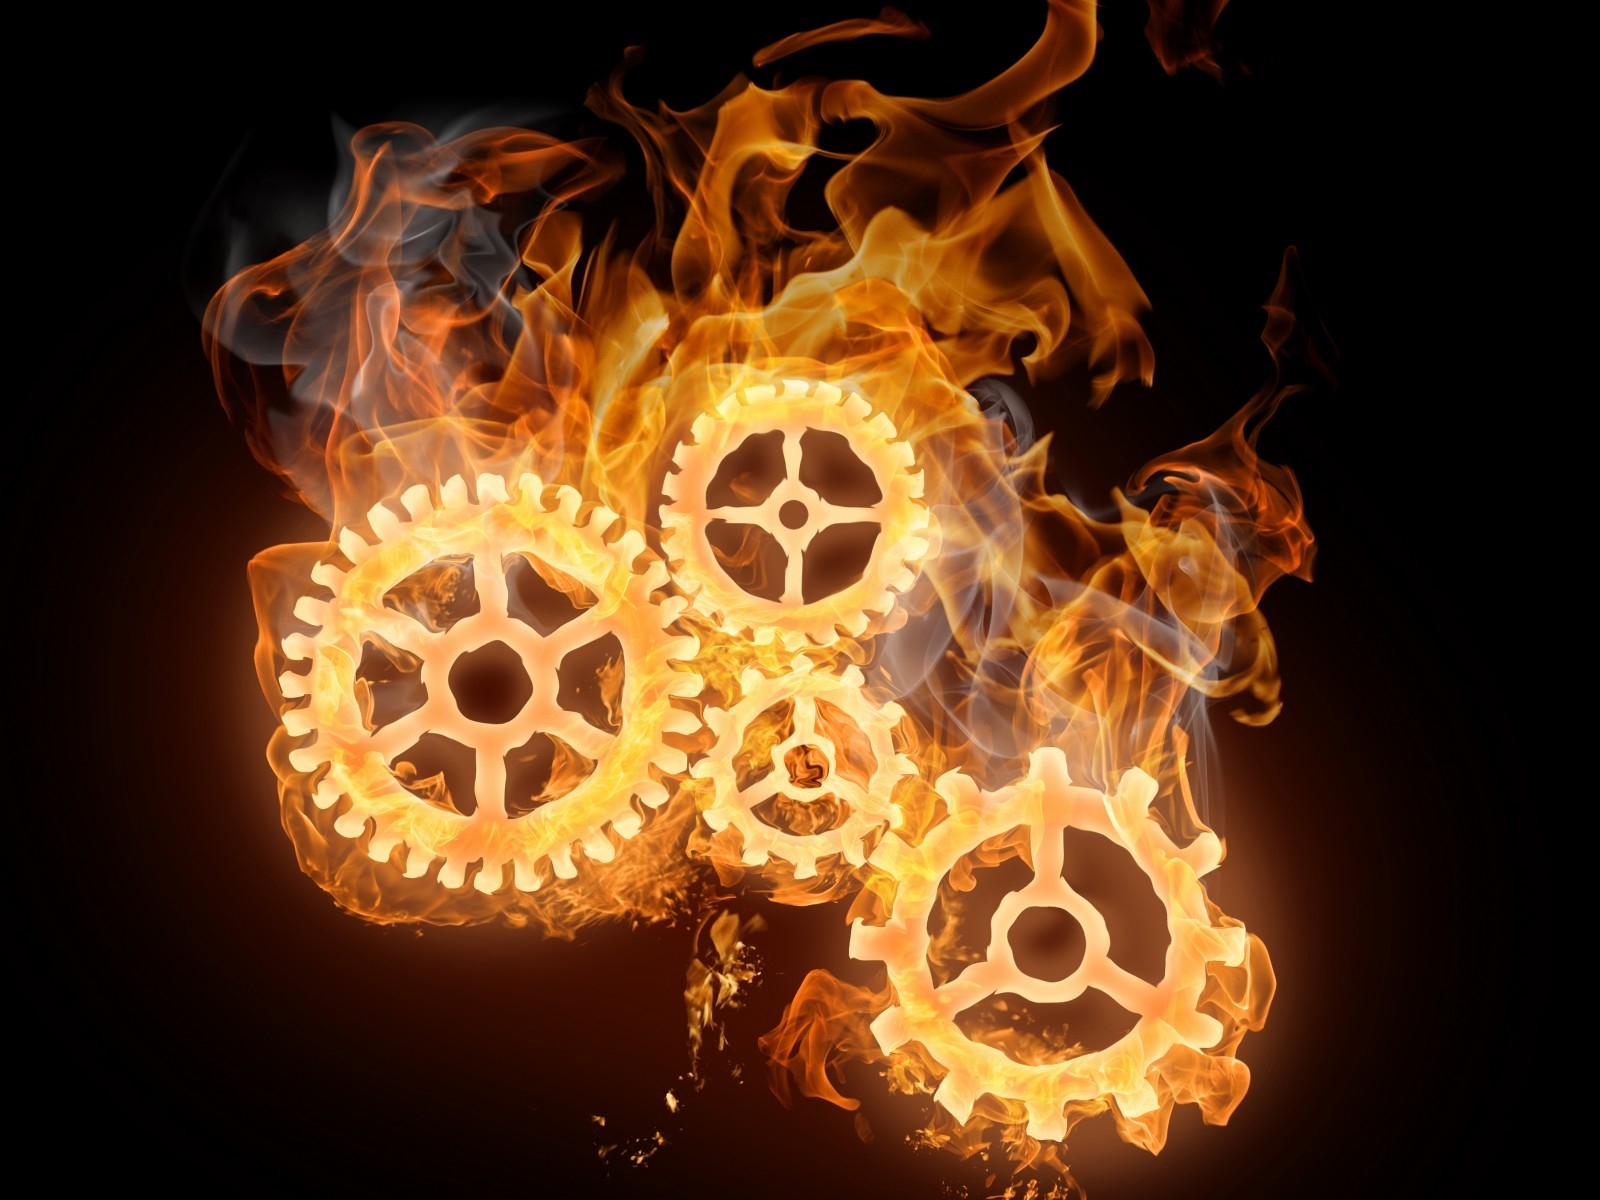 Wheels on Fire for 1600 x 1200 resolution